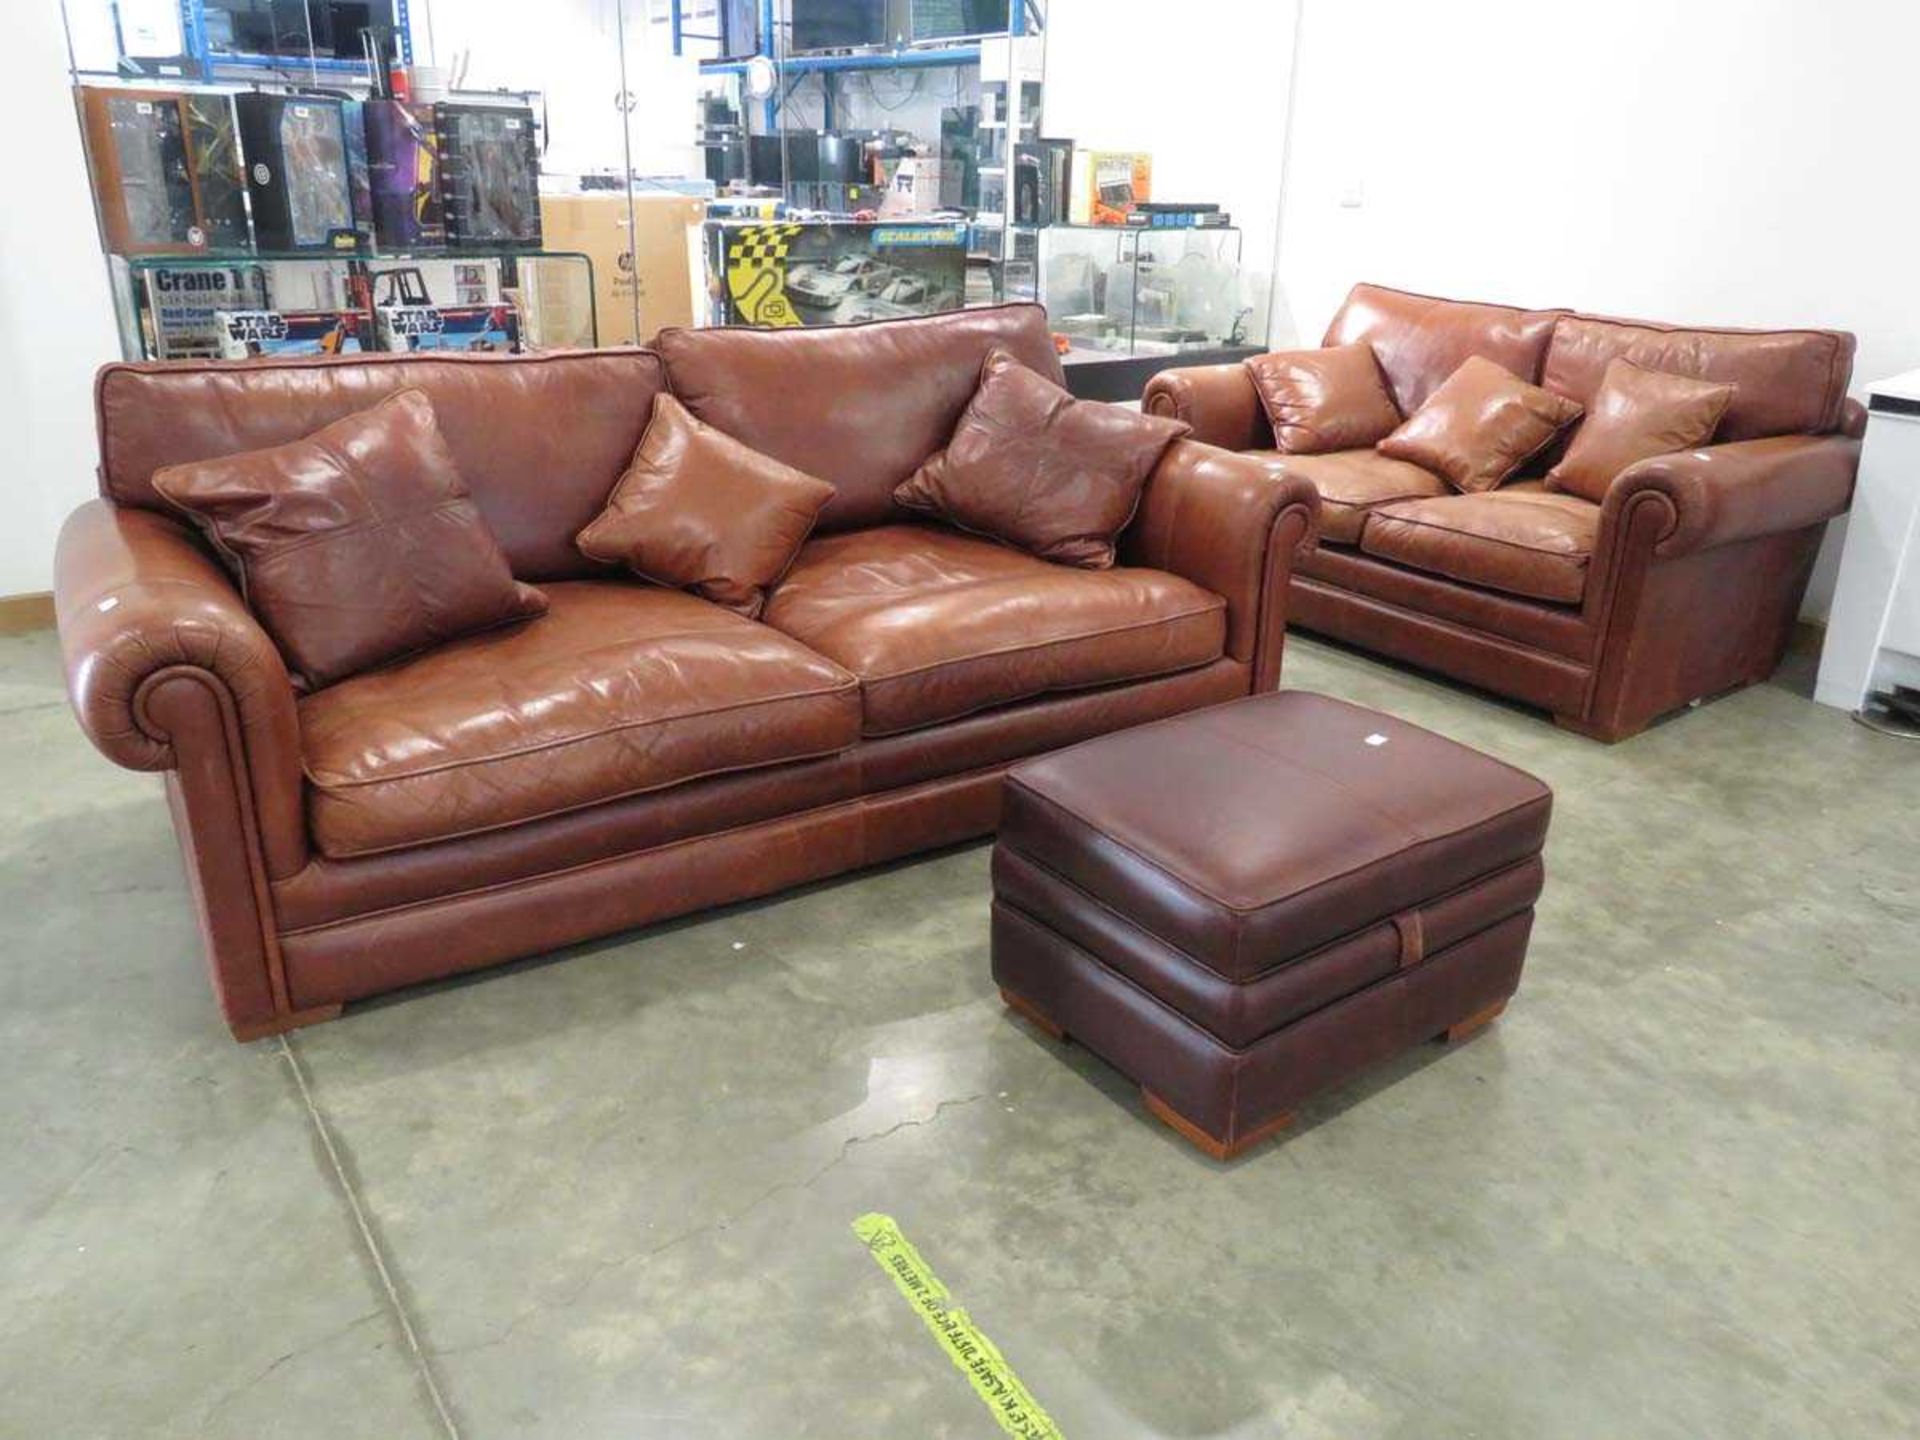 Brown leather three seater sofa plus a matching two seater and footstool